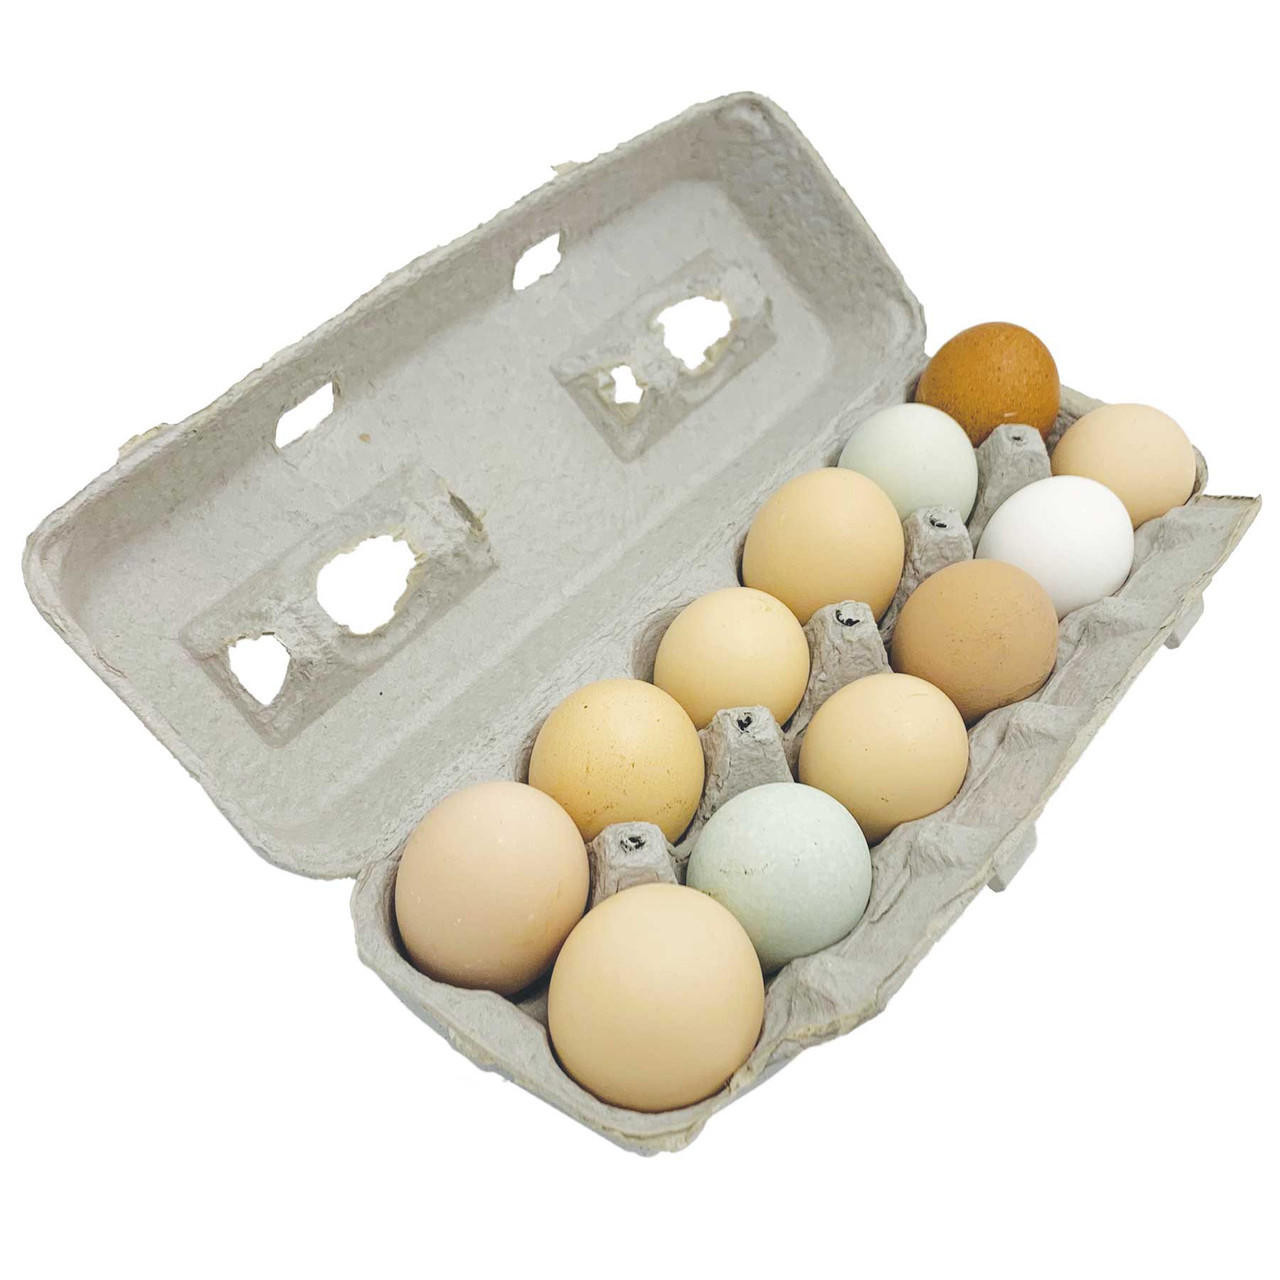 Large Blank Egg Cartons 250 Pack by Mann Lake